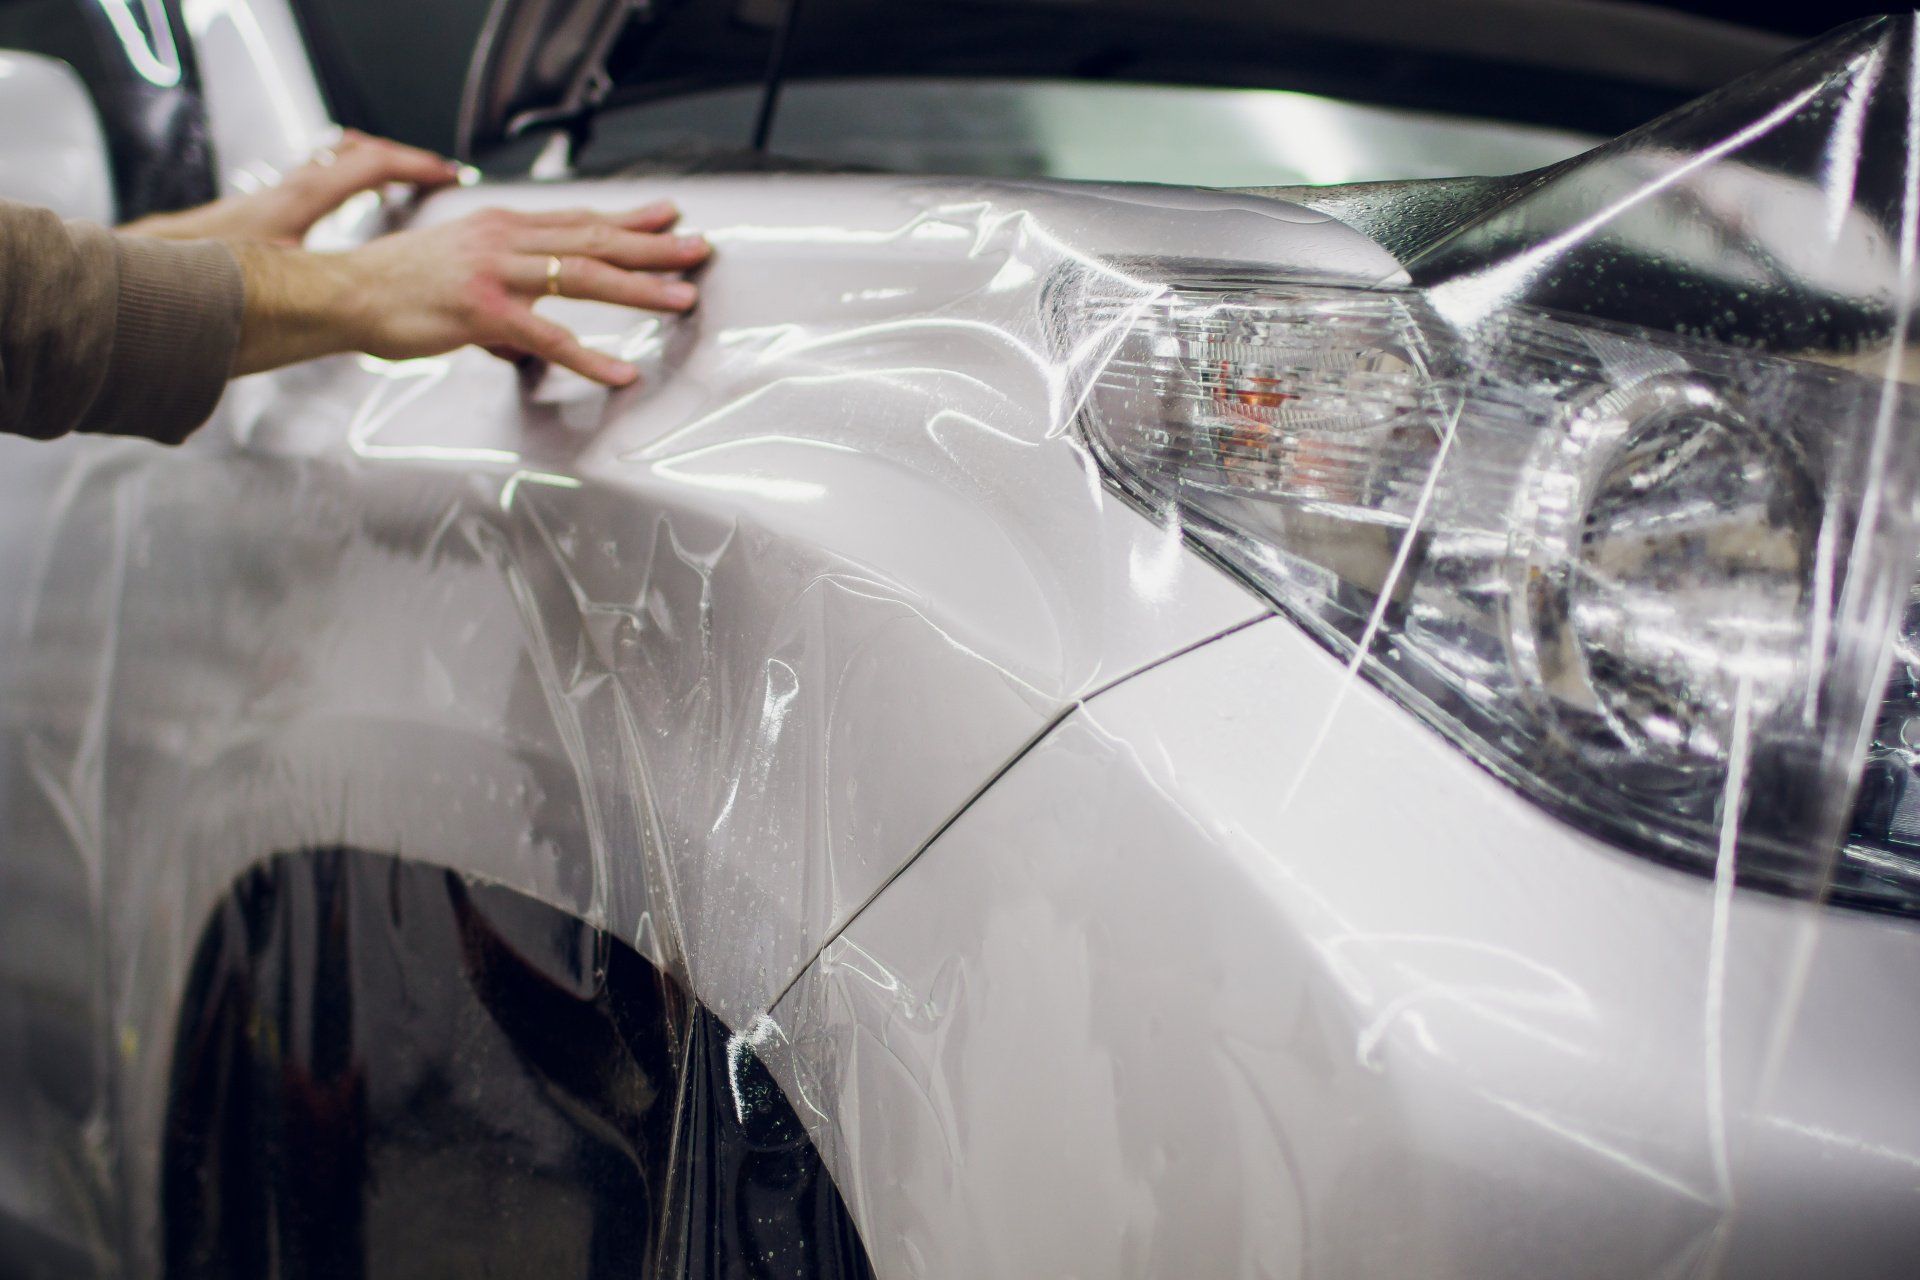 Methods to Remove Scratches from Car Windows